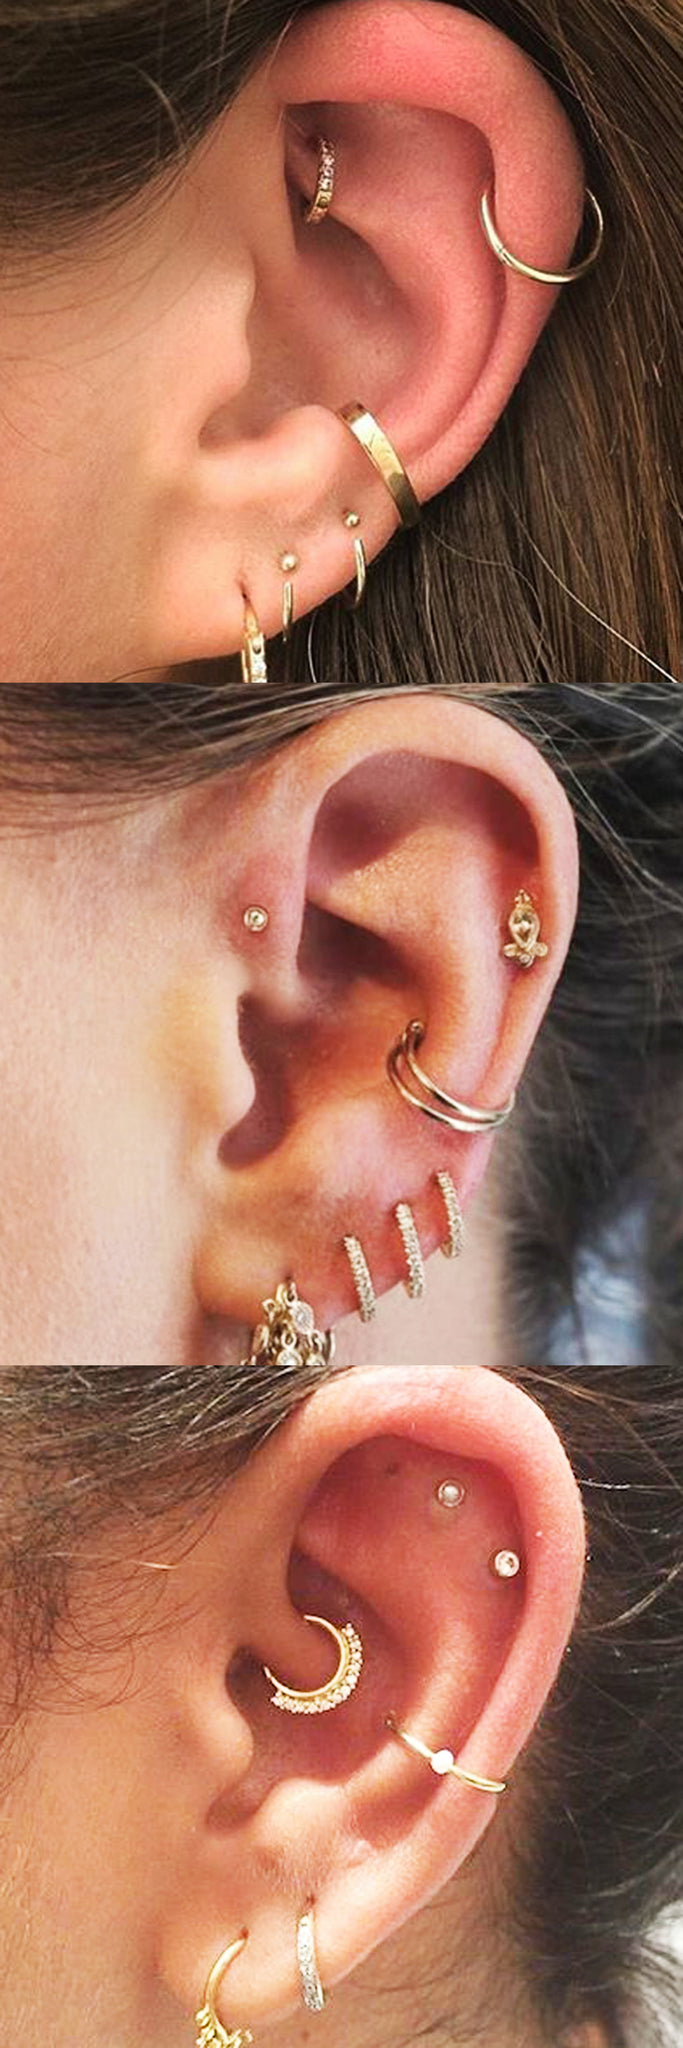 Cute Multiple Ear Piercing Gold Jewelry Combinations Ideas at MyBodiArt.com - Cartilage Ring - Helix Hoop - Rook Earring - Tragus Stud - Daith Jewelry